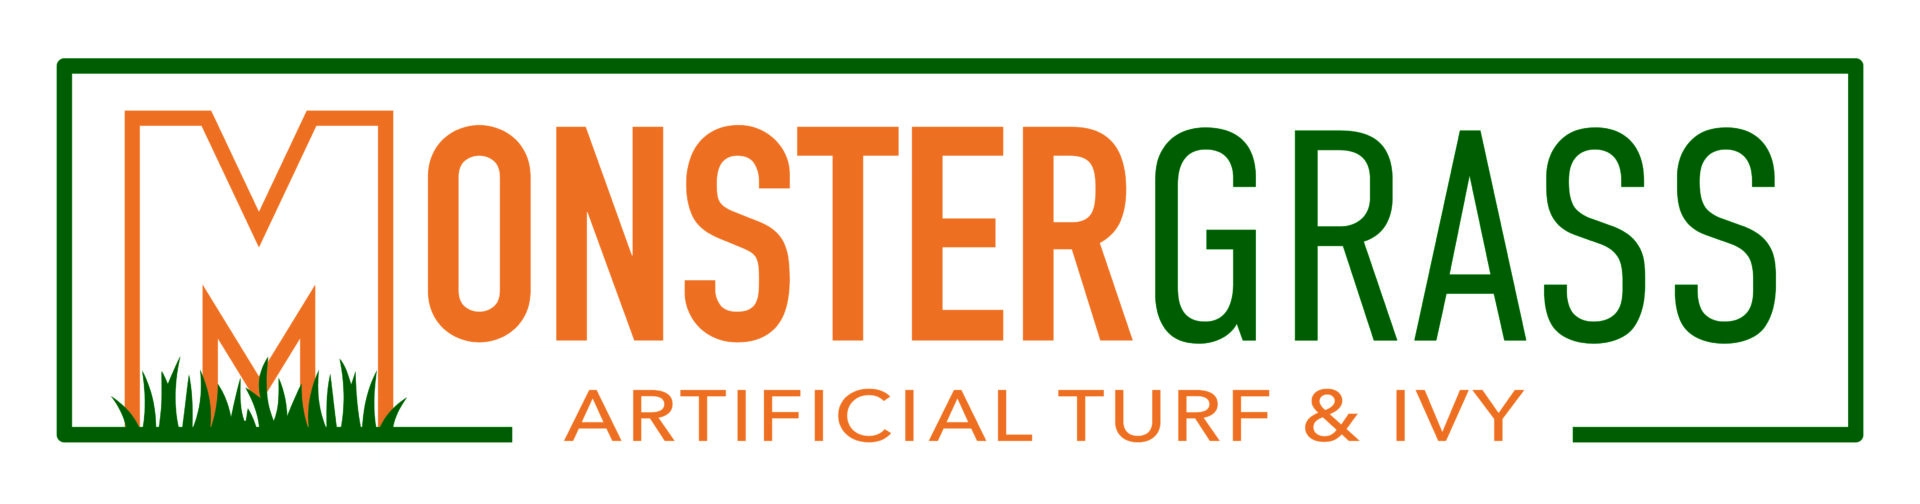 Monster Grass and Artificial Turf Installers Logo